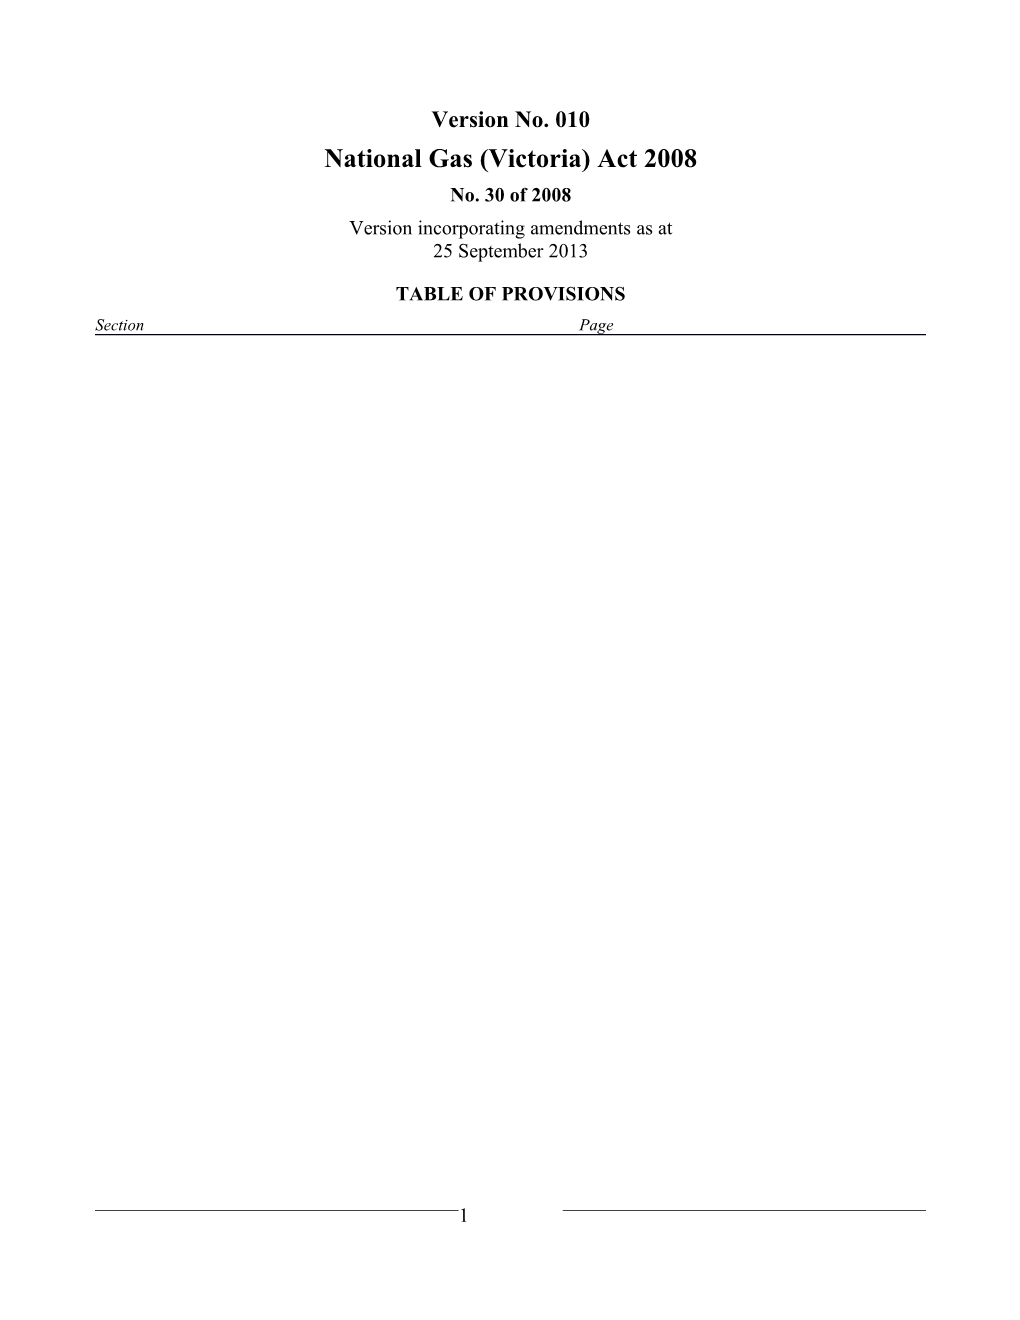 National Gas (Victoria) Act 2008